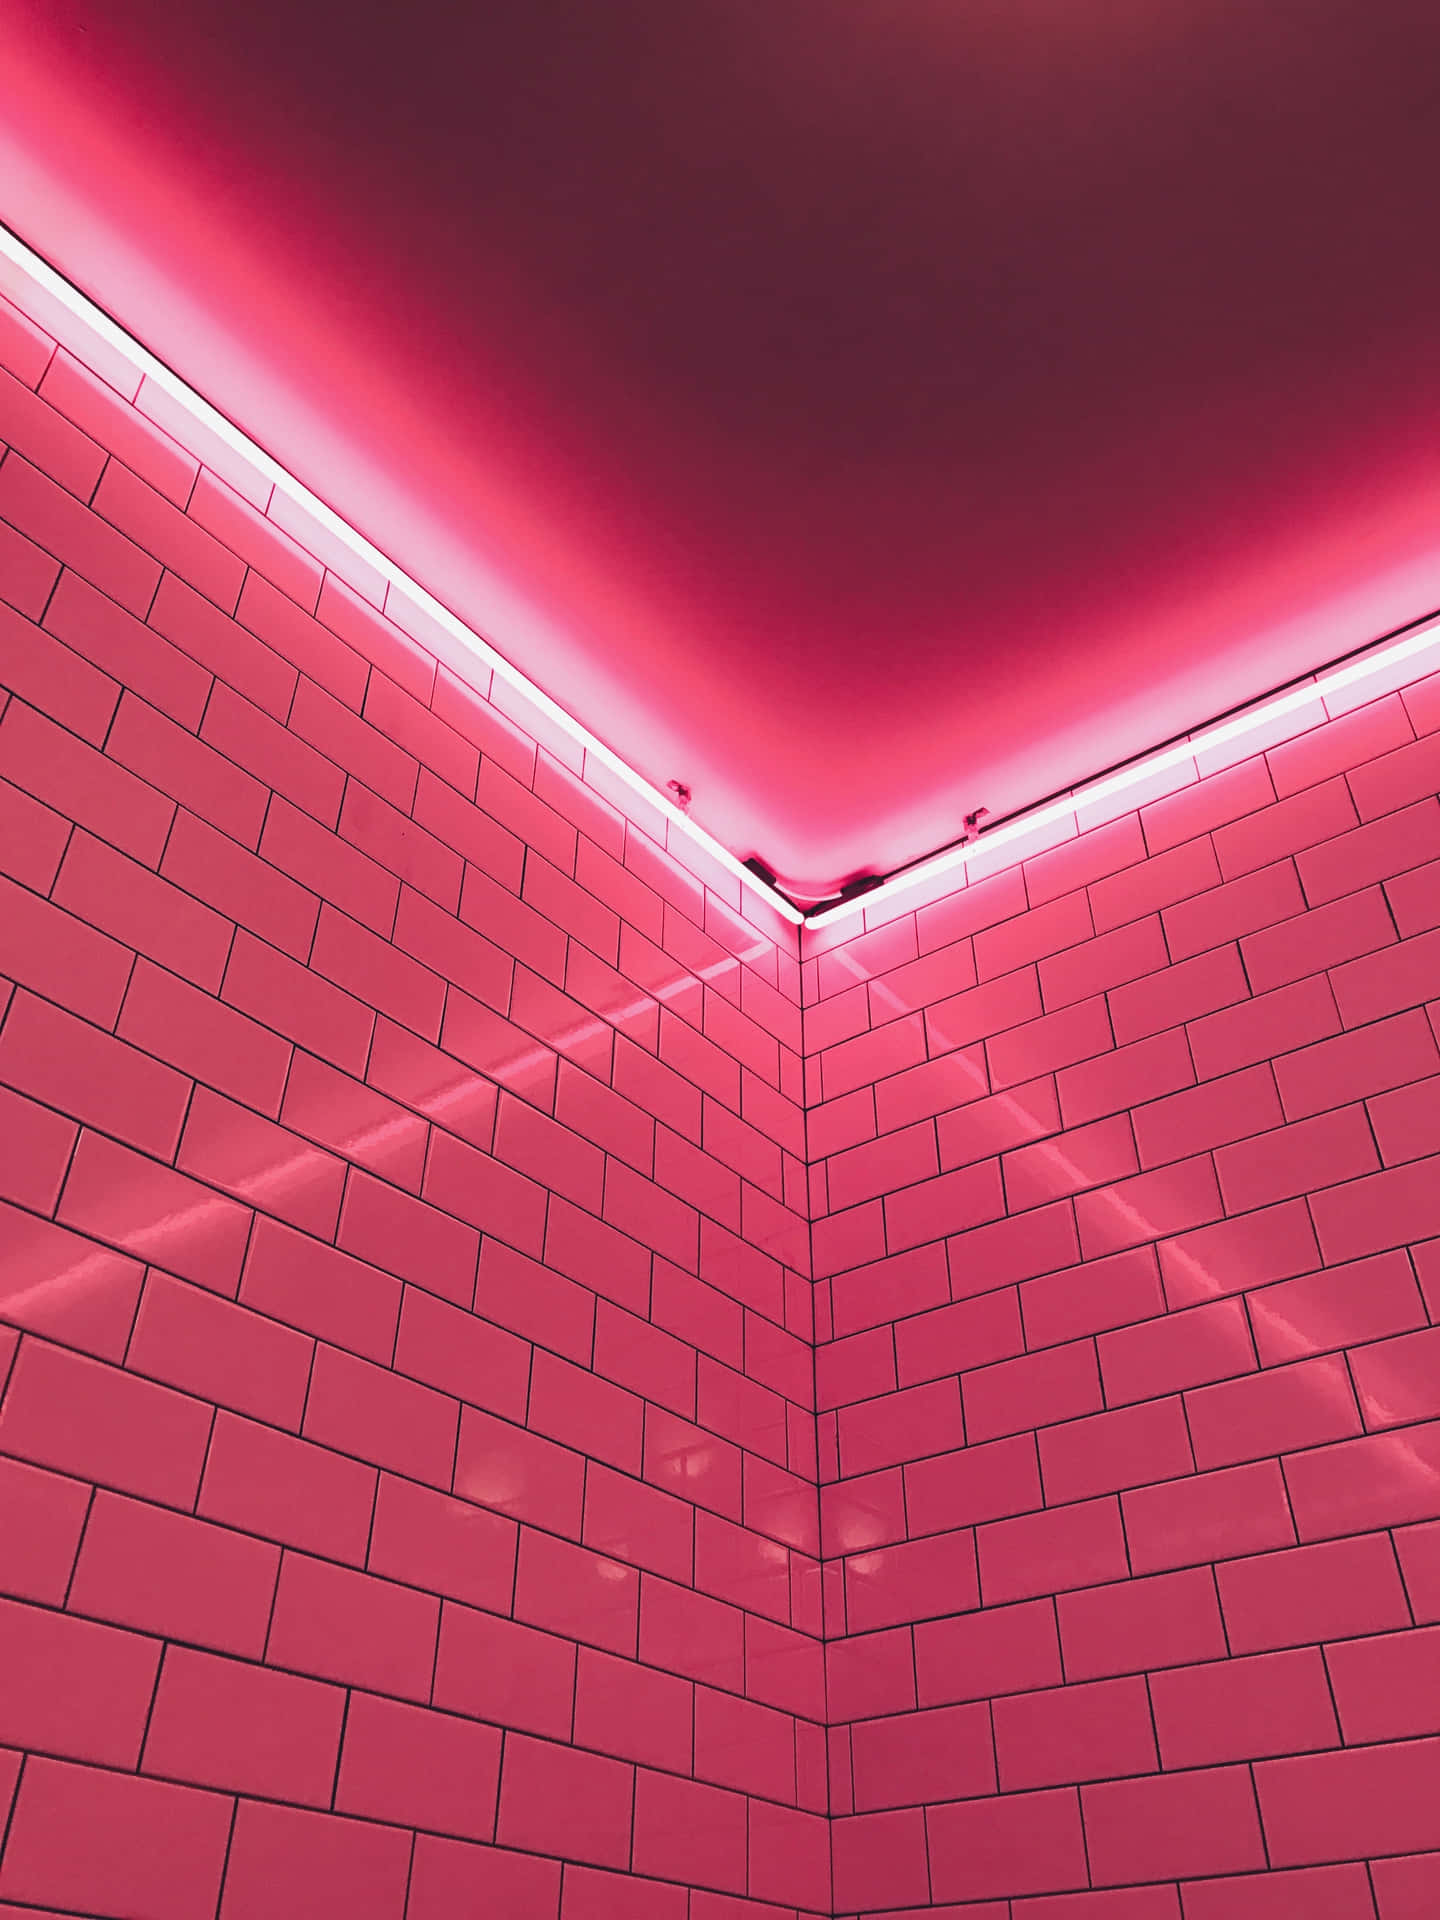 A Pink Tiled Bathroom With A Pink Light Wallpaper